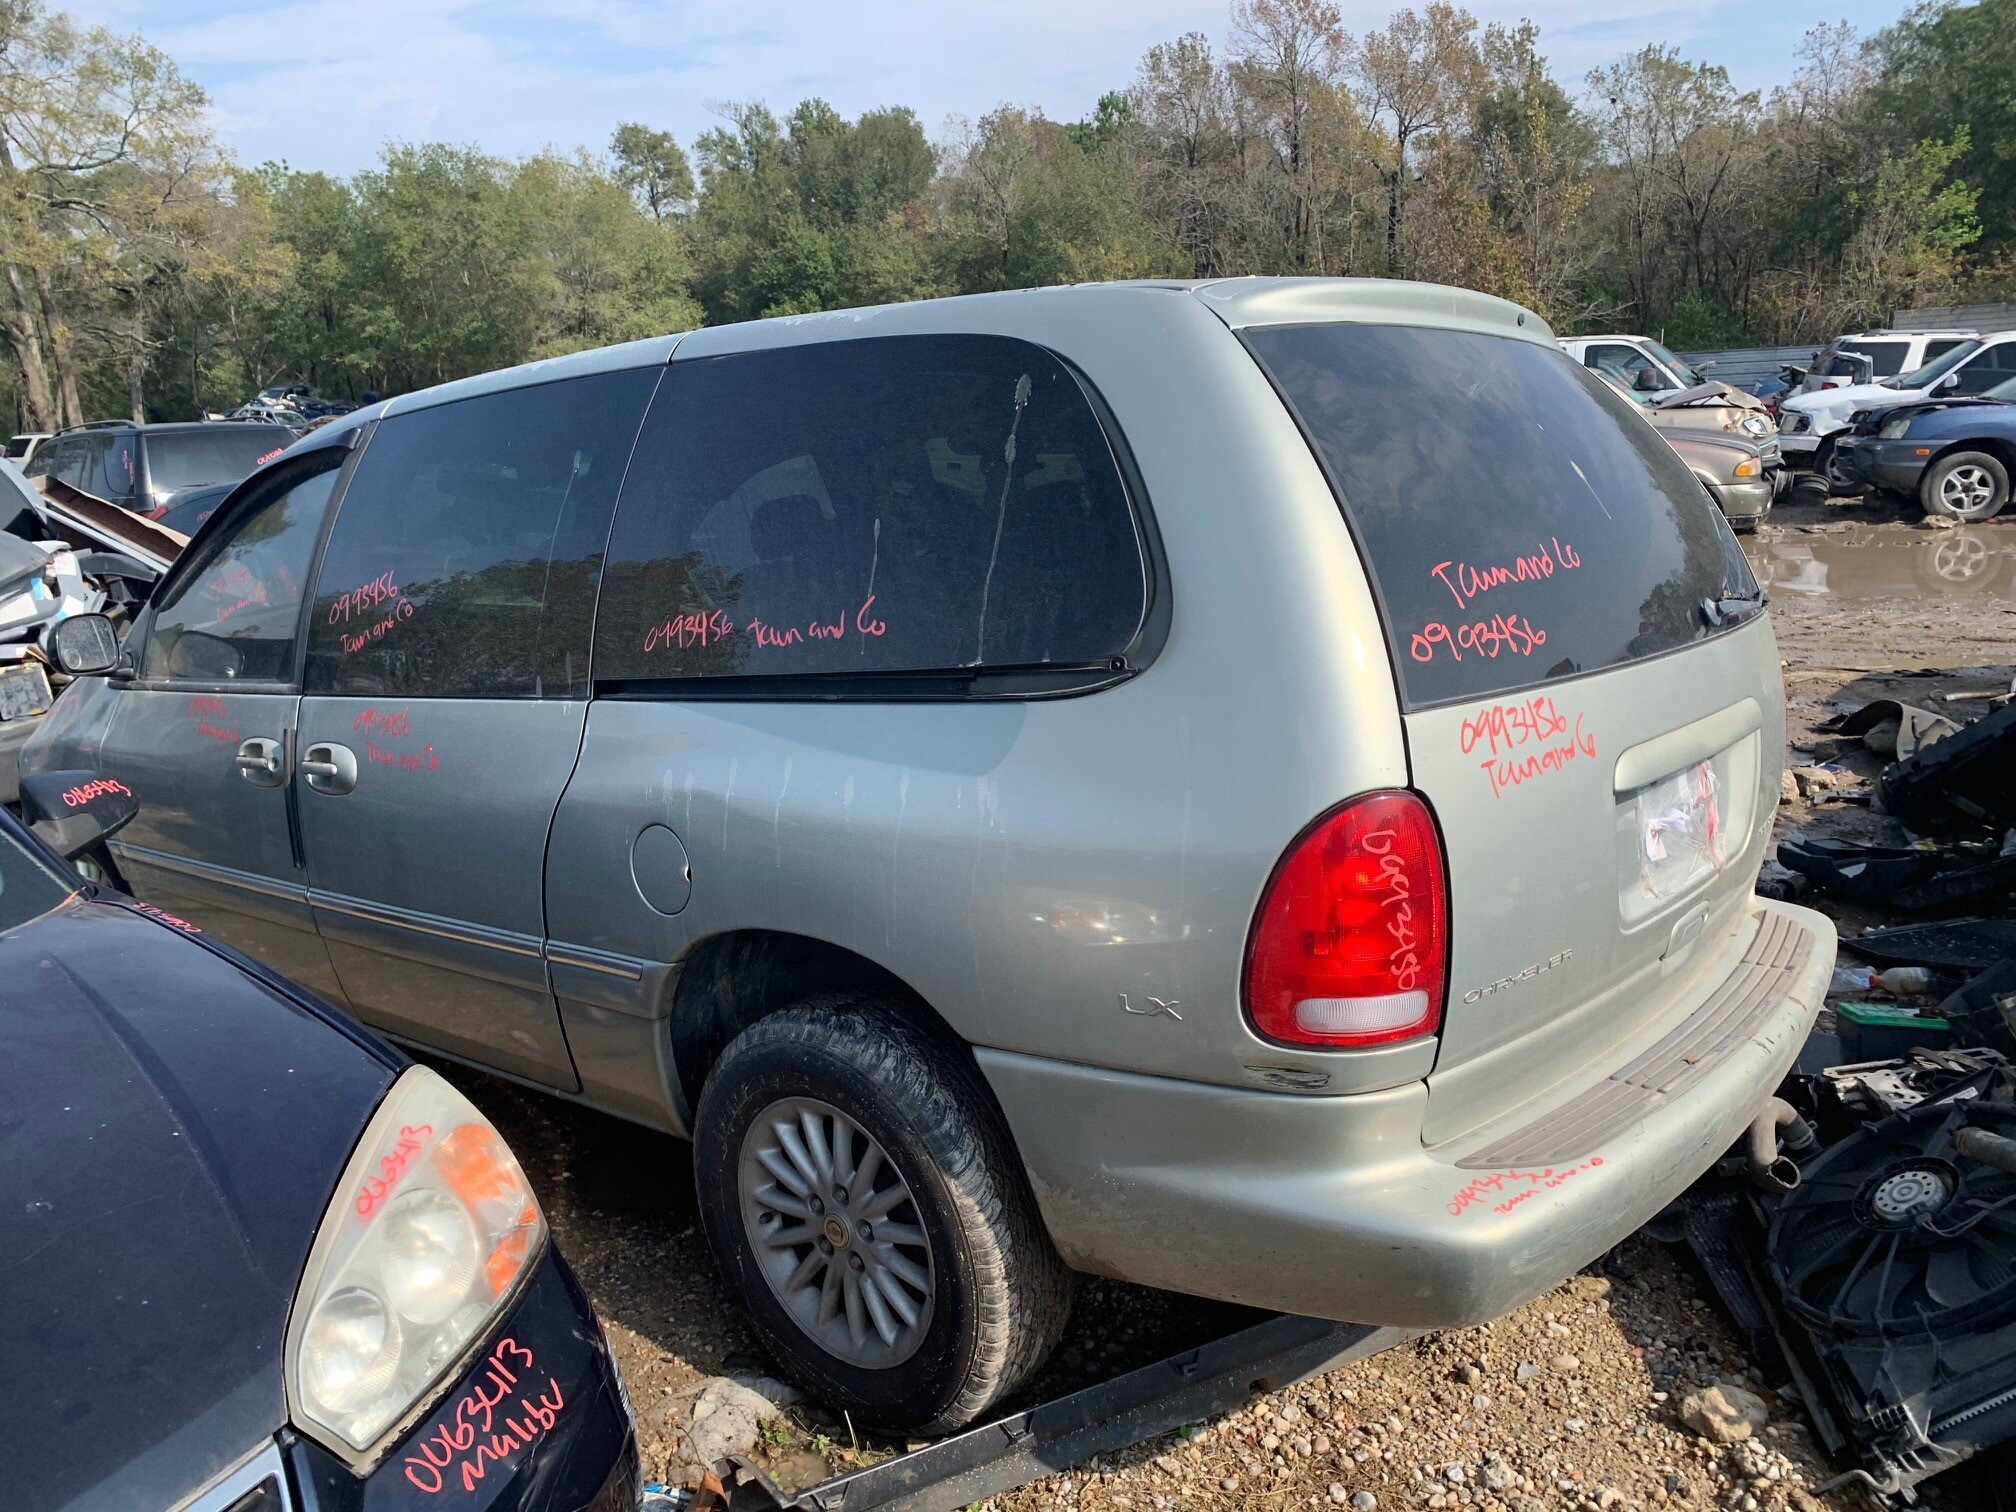 1999 Chrysler Town and Country